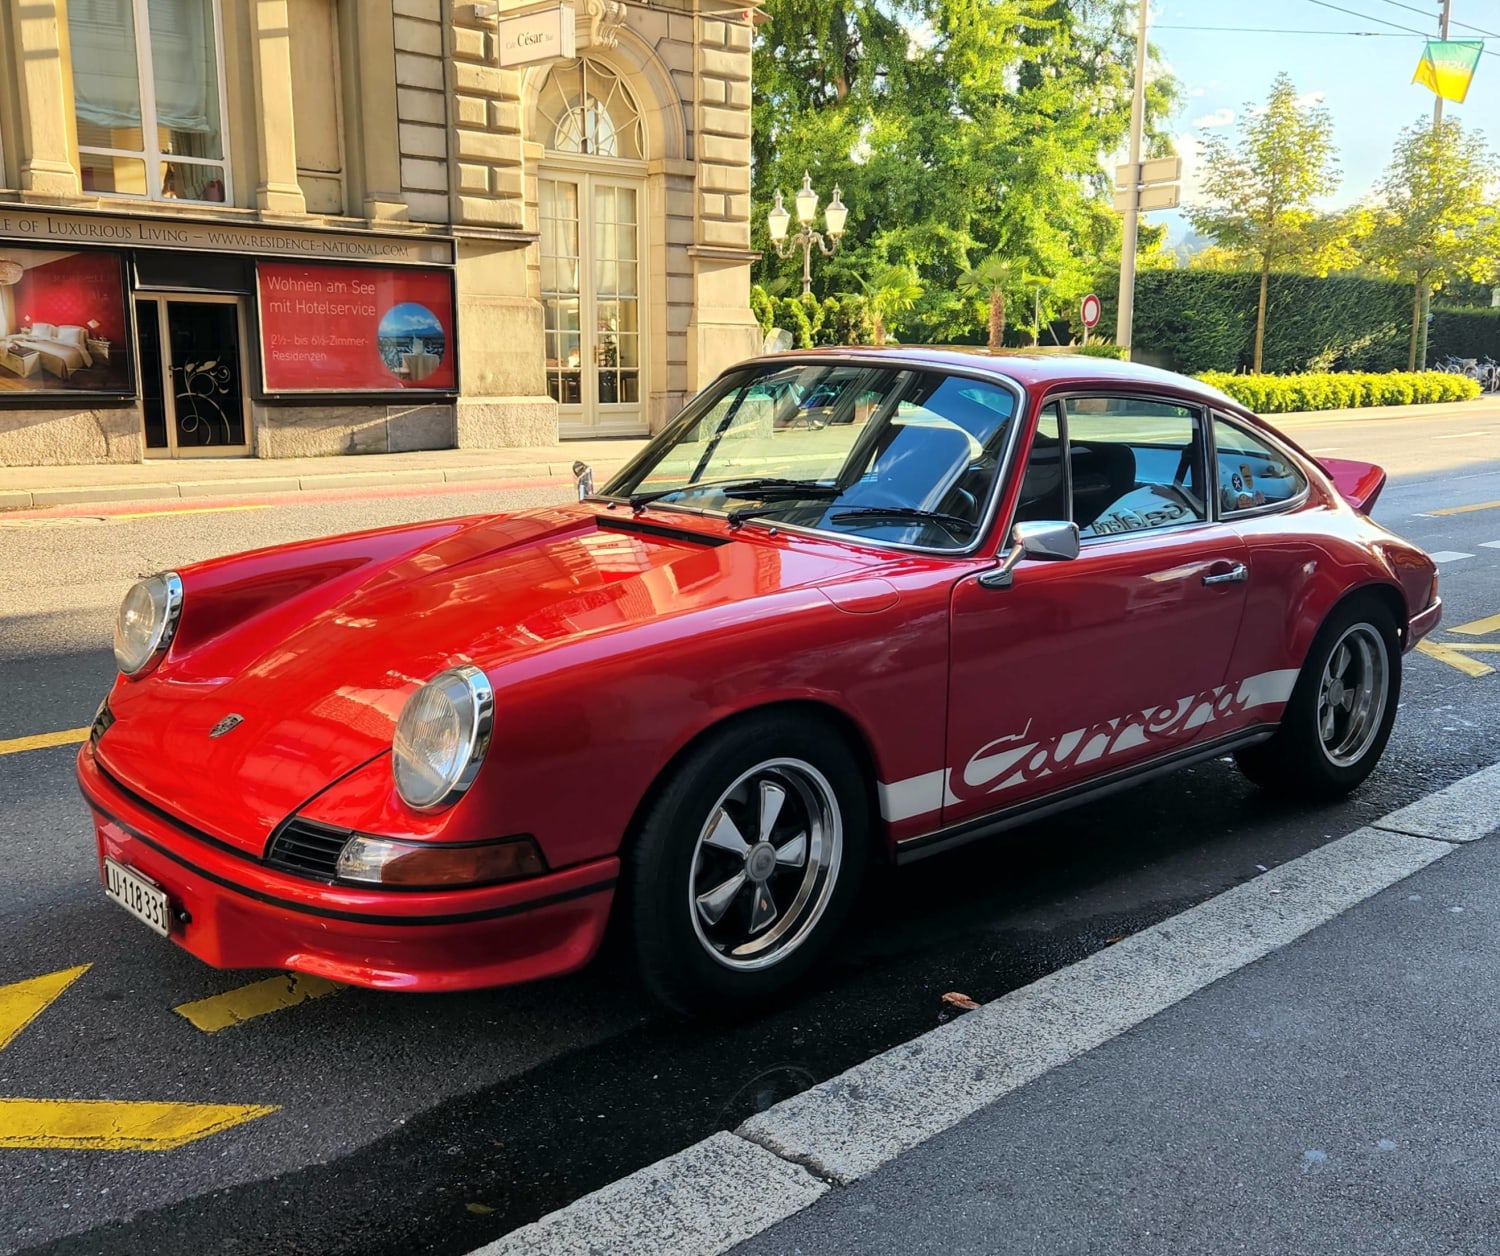 Spotted this beauty in Lucerne, Switzerland last week